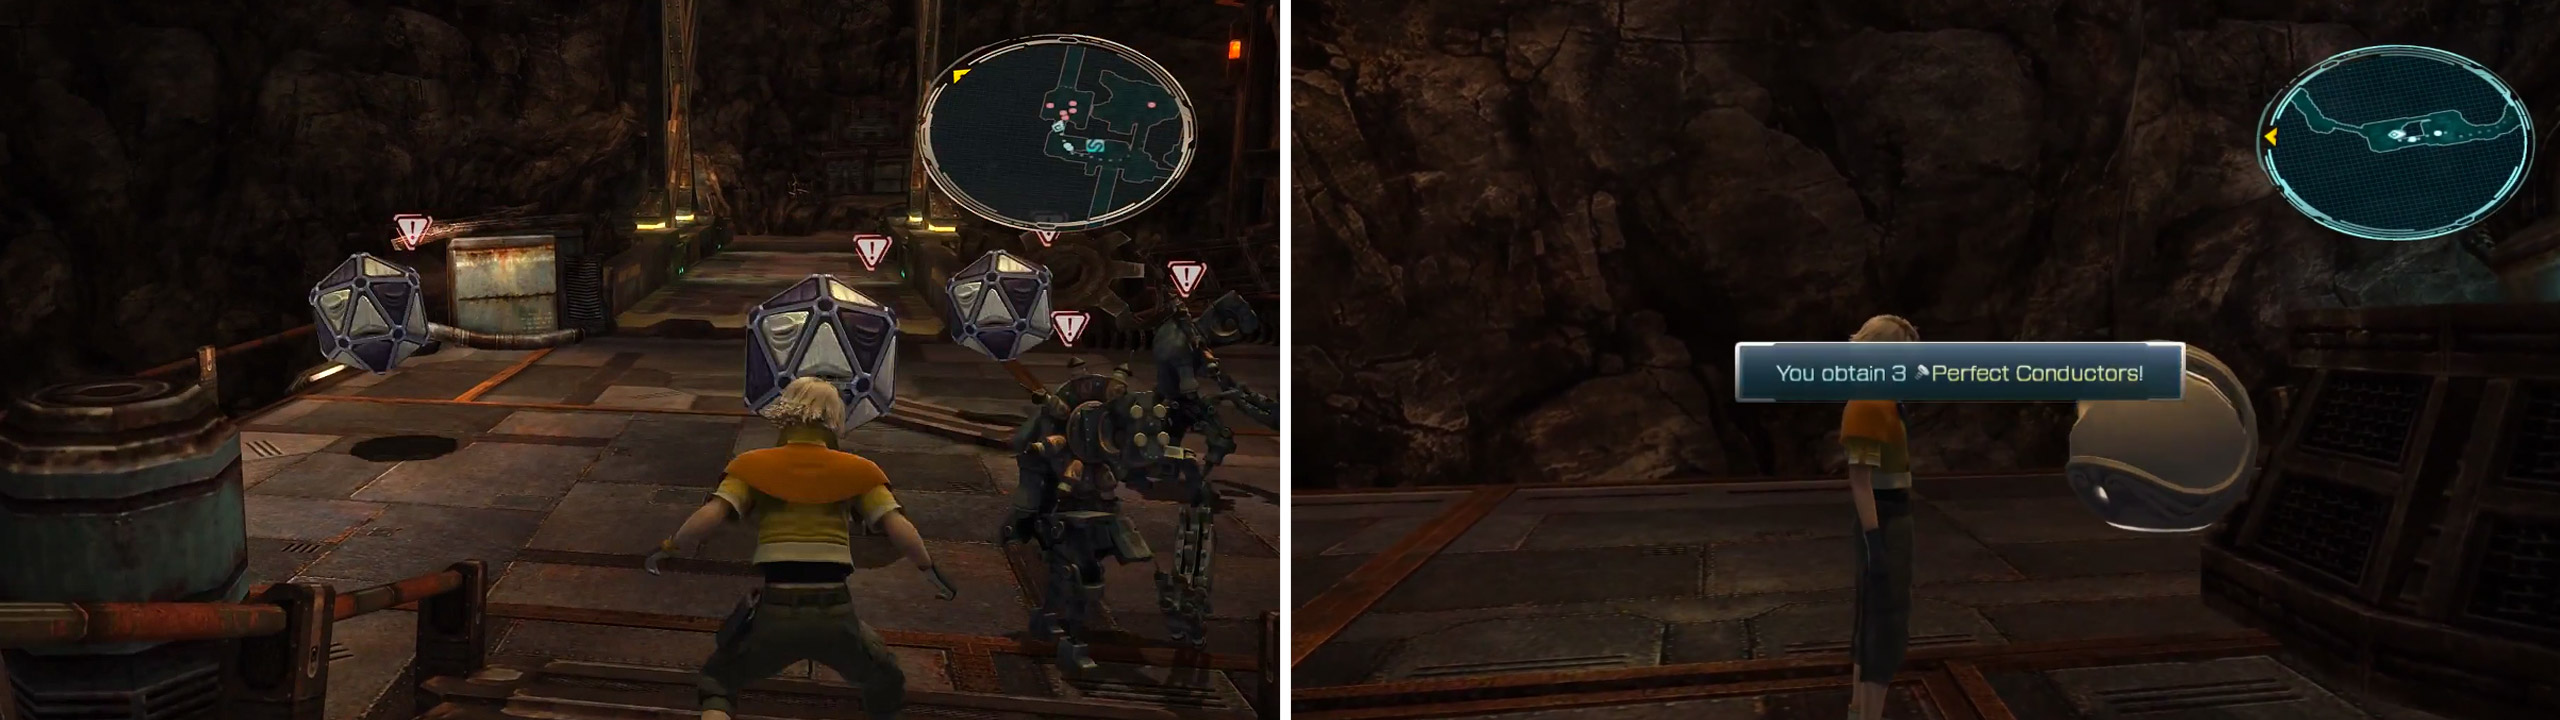 Pulsework Centurions and Cryohedrons fight amongst themselves (left) and the Perfect Conductor location (right).